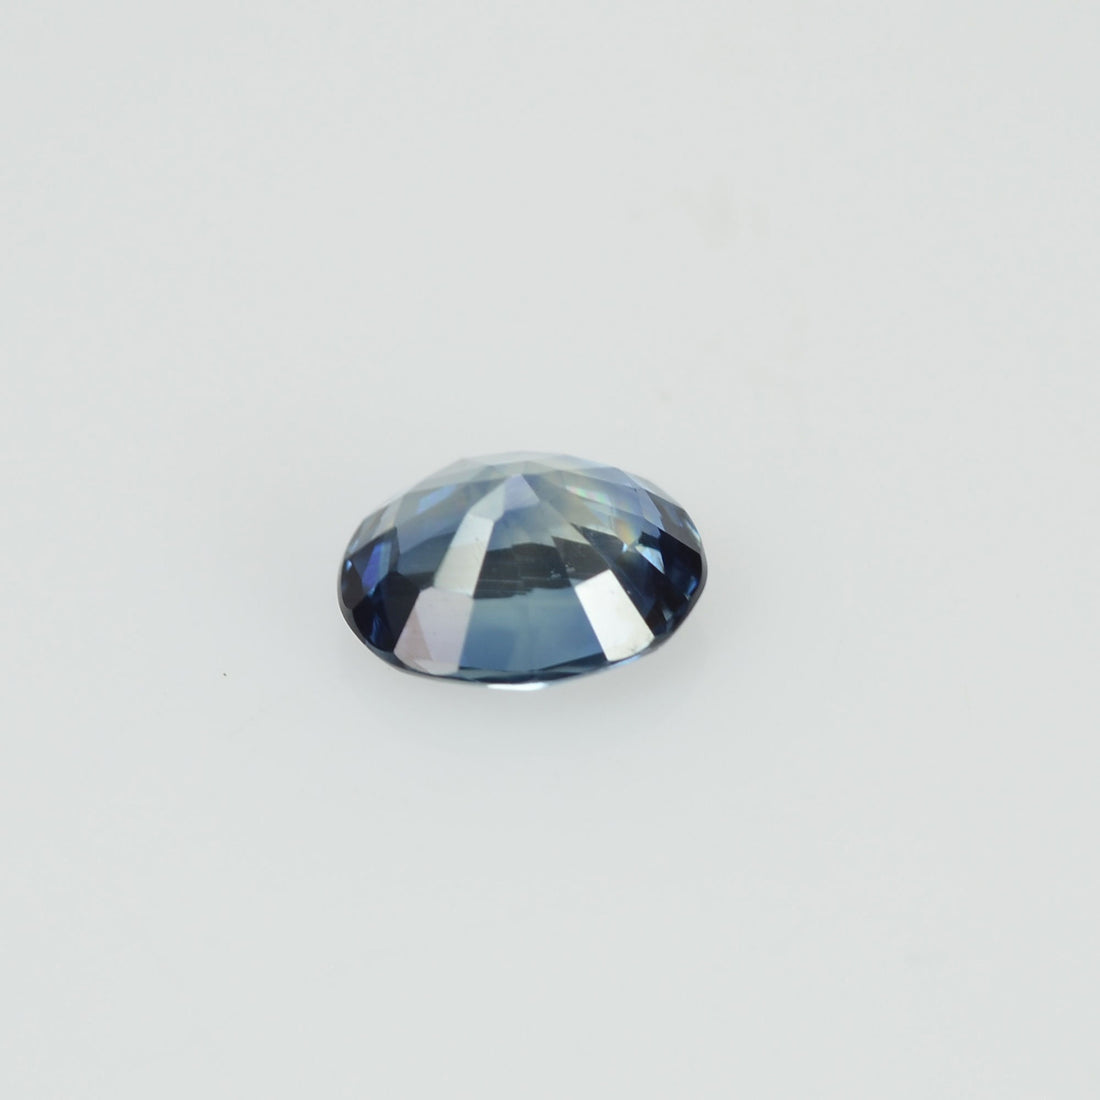 0.34 cts Natural Blue Sapphire Loose Gemstone Oval Cut